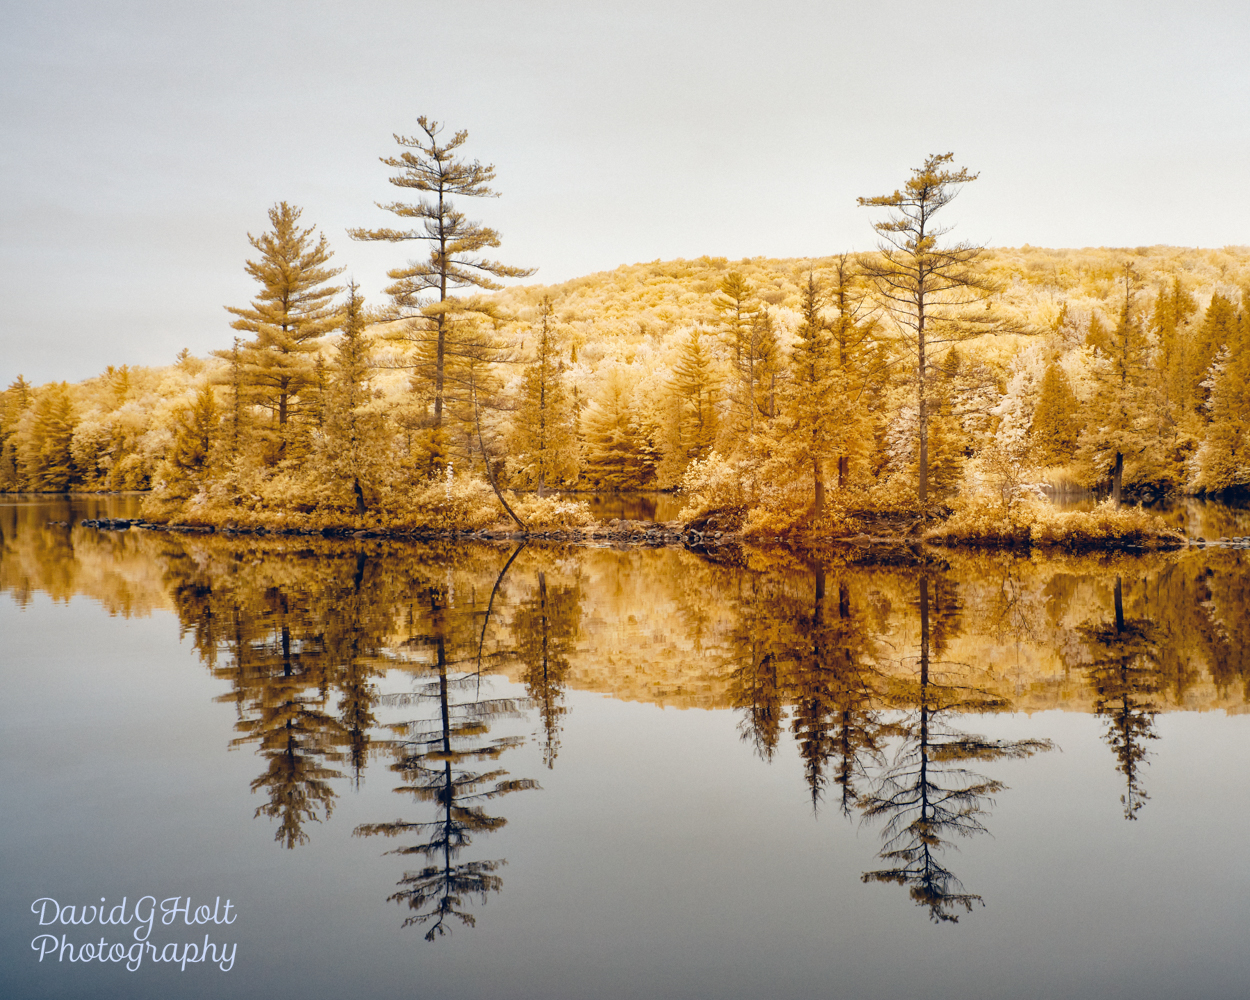 Tree Reflections in Infrared Scenic Fine Art Print Wall Art